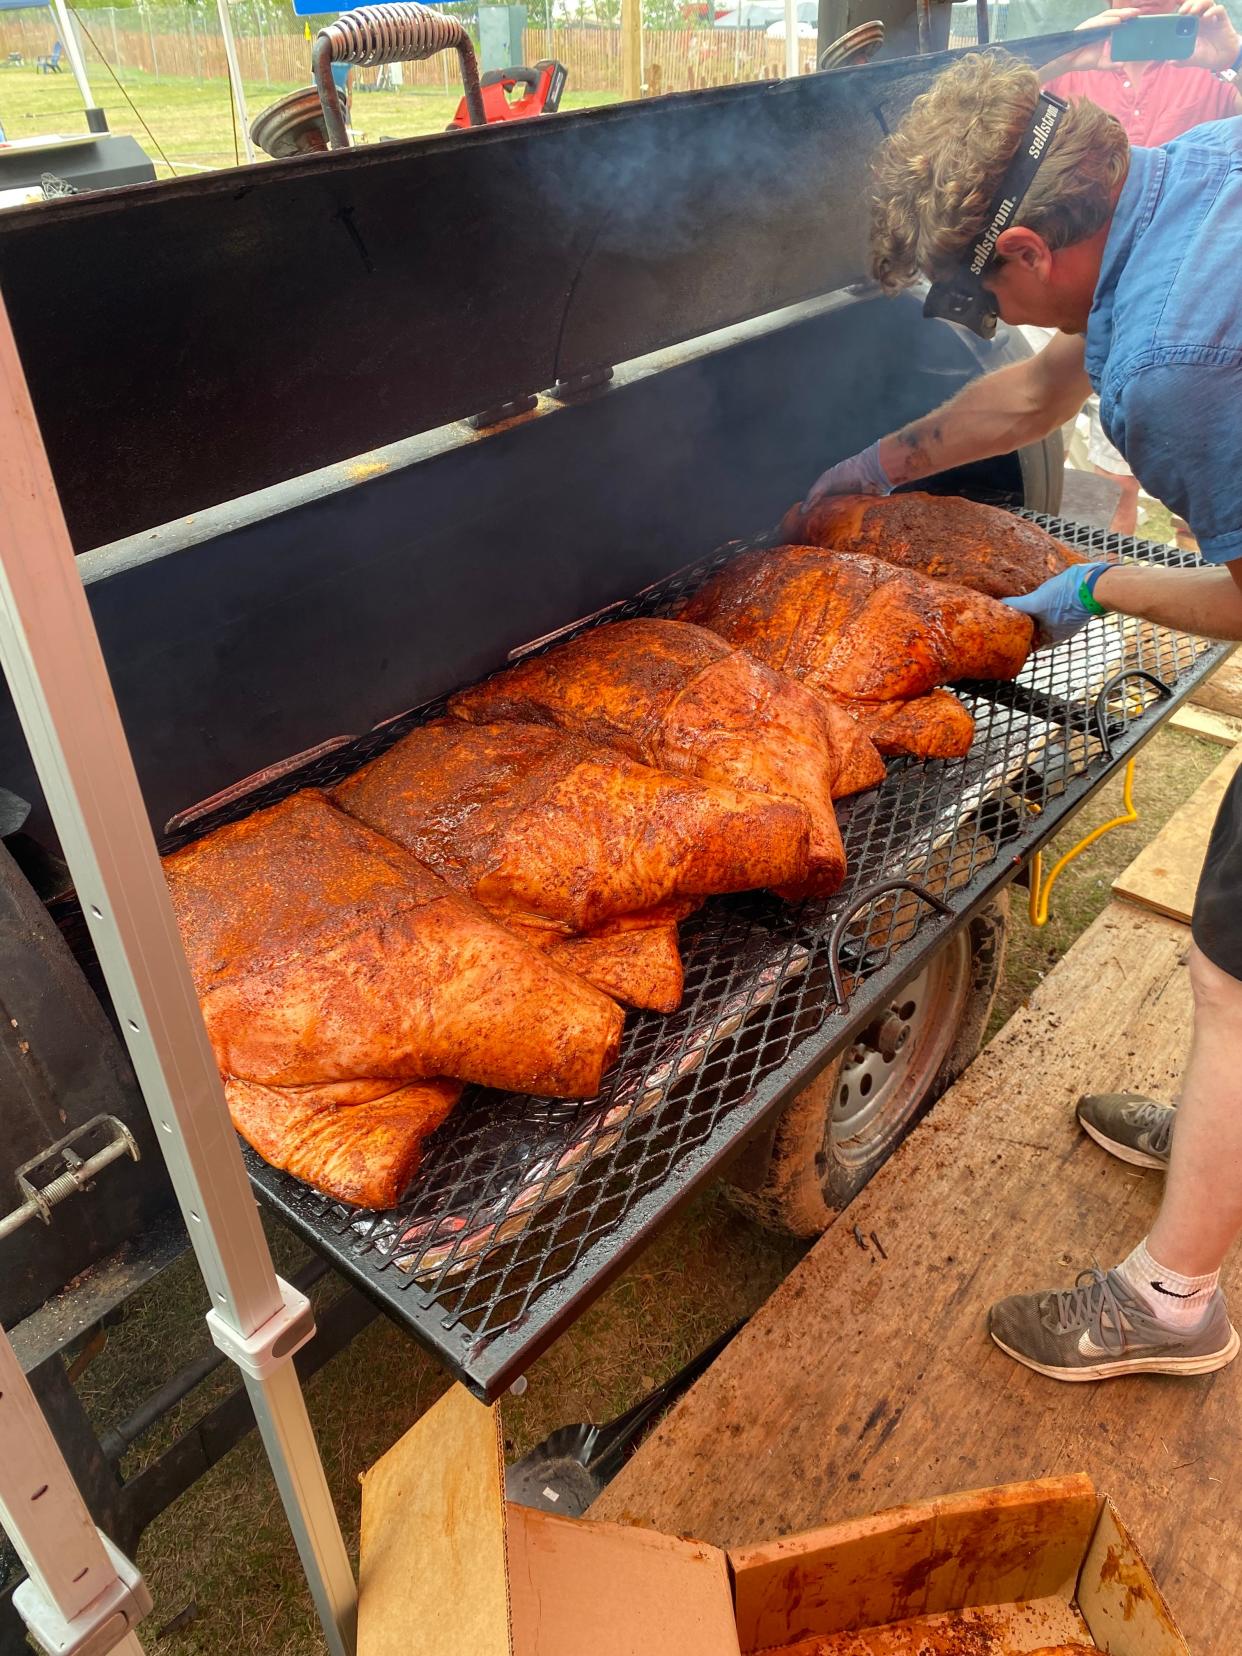 Marshall Bartlett, owner of Home Place Pastures and member of the Sweet Cheeks BBQ Competition Barbecue Team, puts shoulders on the smoker at the 2023 Memphis in May World Championship Barbecue Cooking Contest. Memphis-based Sweet Cheeks BBQ placed first in the Shoulder division.